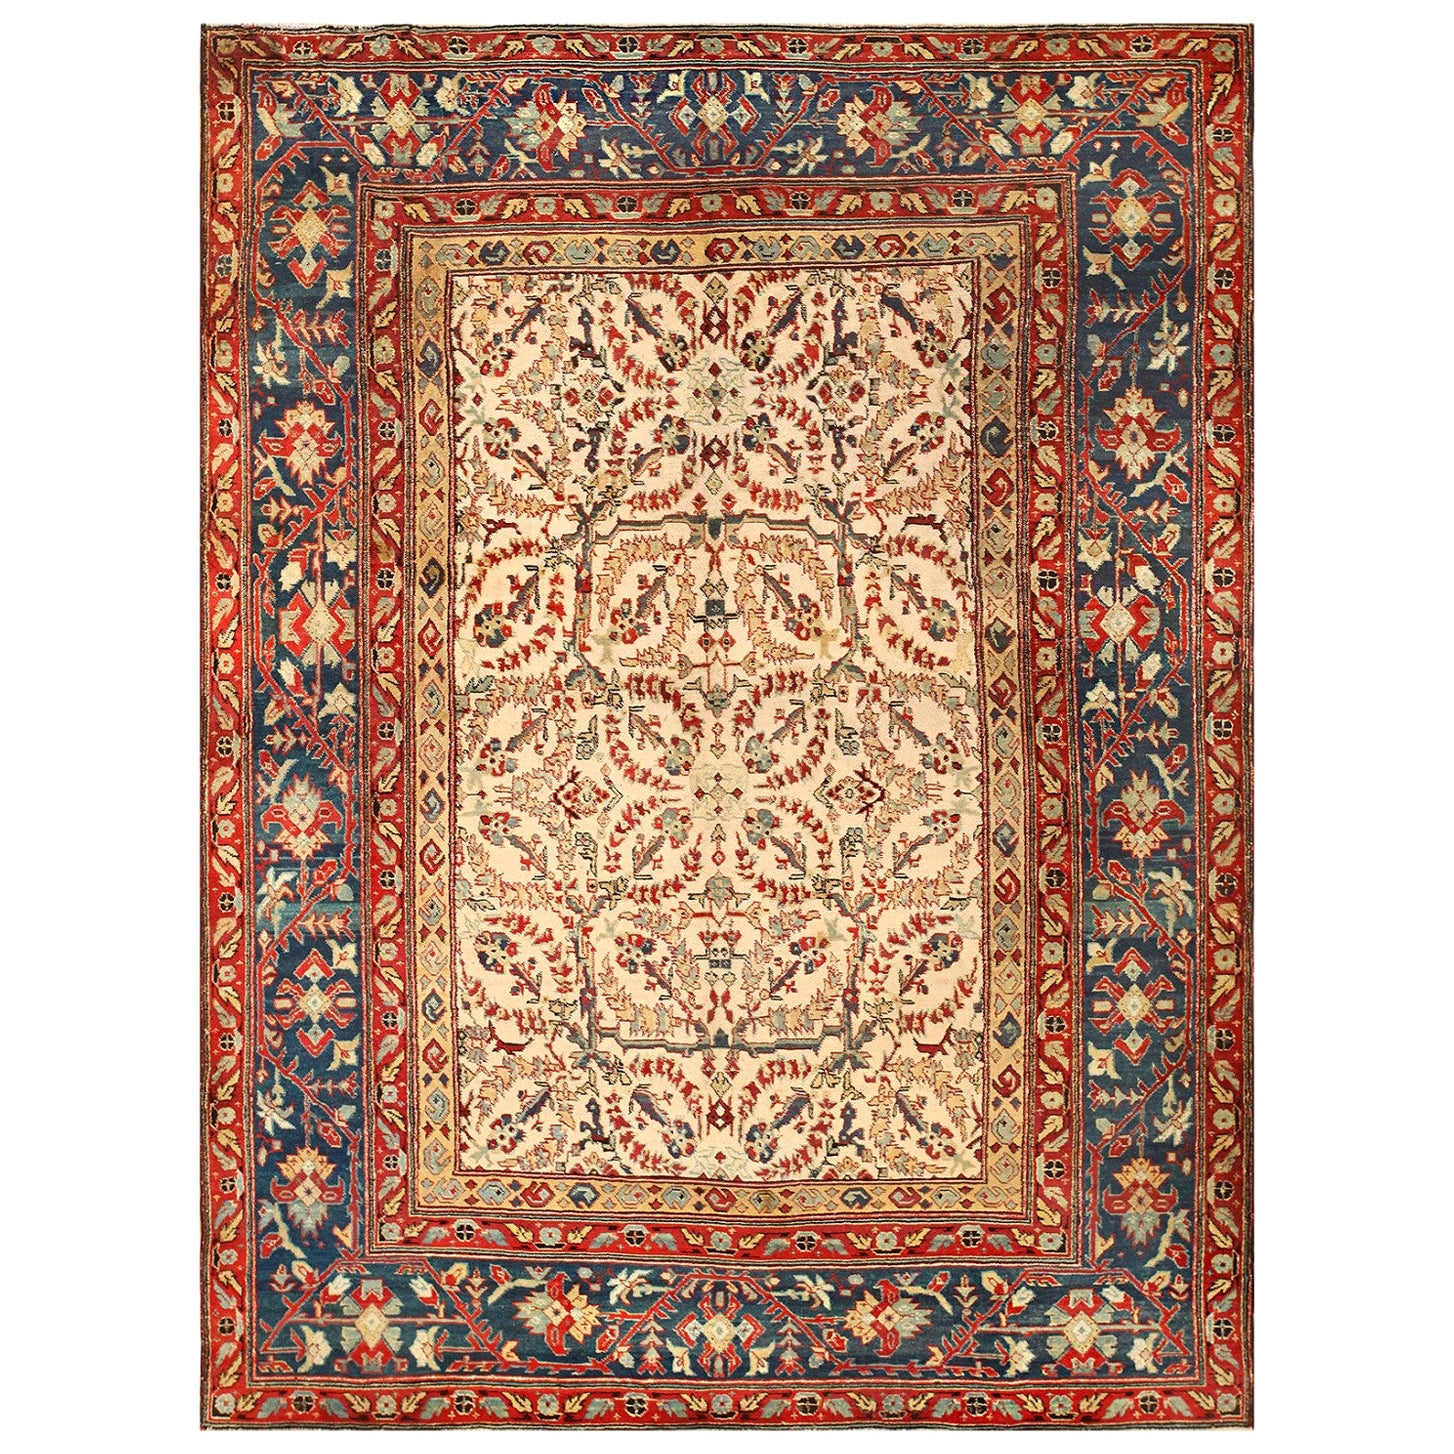 Antique Indian Agra Rug. Size: 7 ft 5 in x 9 ft 9 in